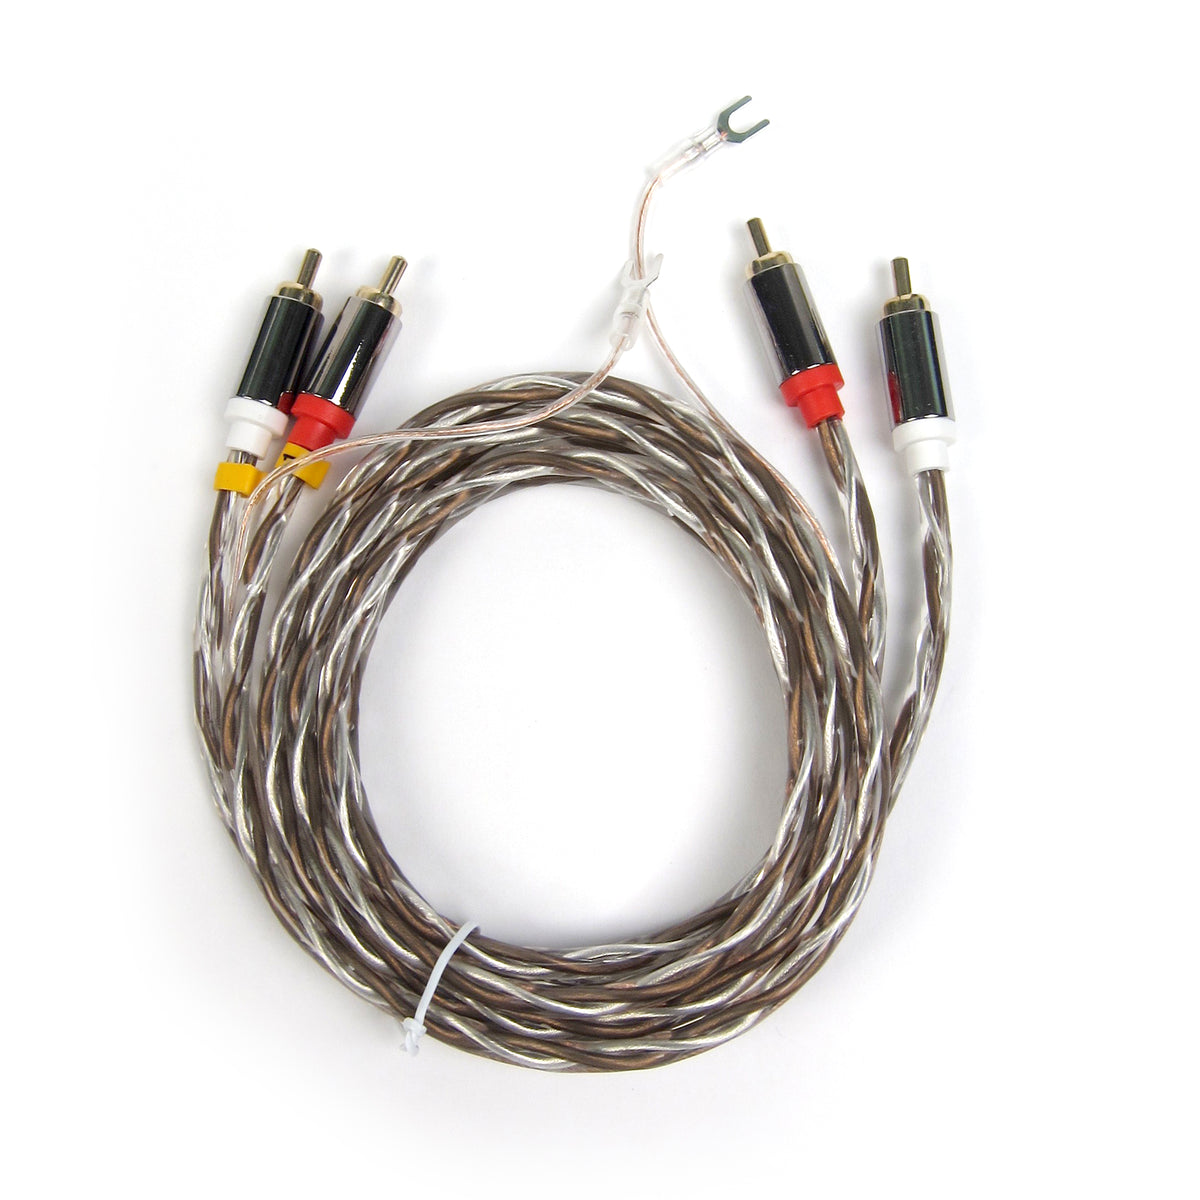 Audio Phono Tonearm Cable, Phono Cable Ground Wire